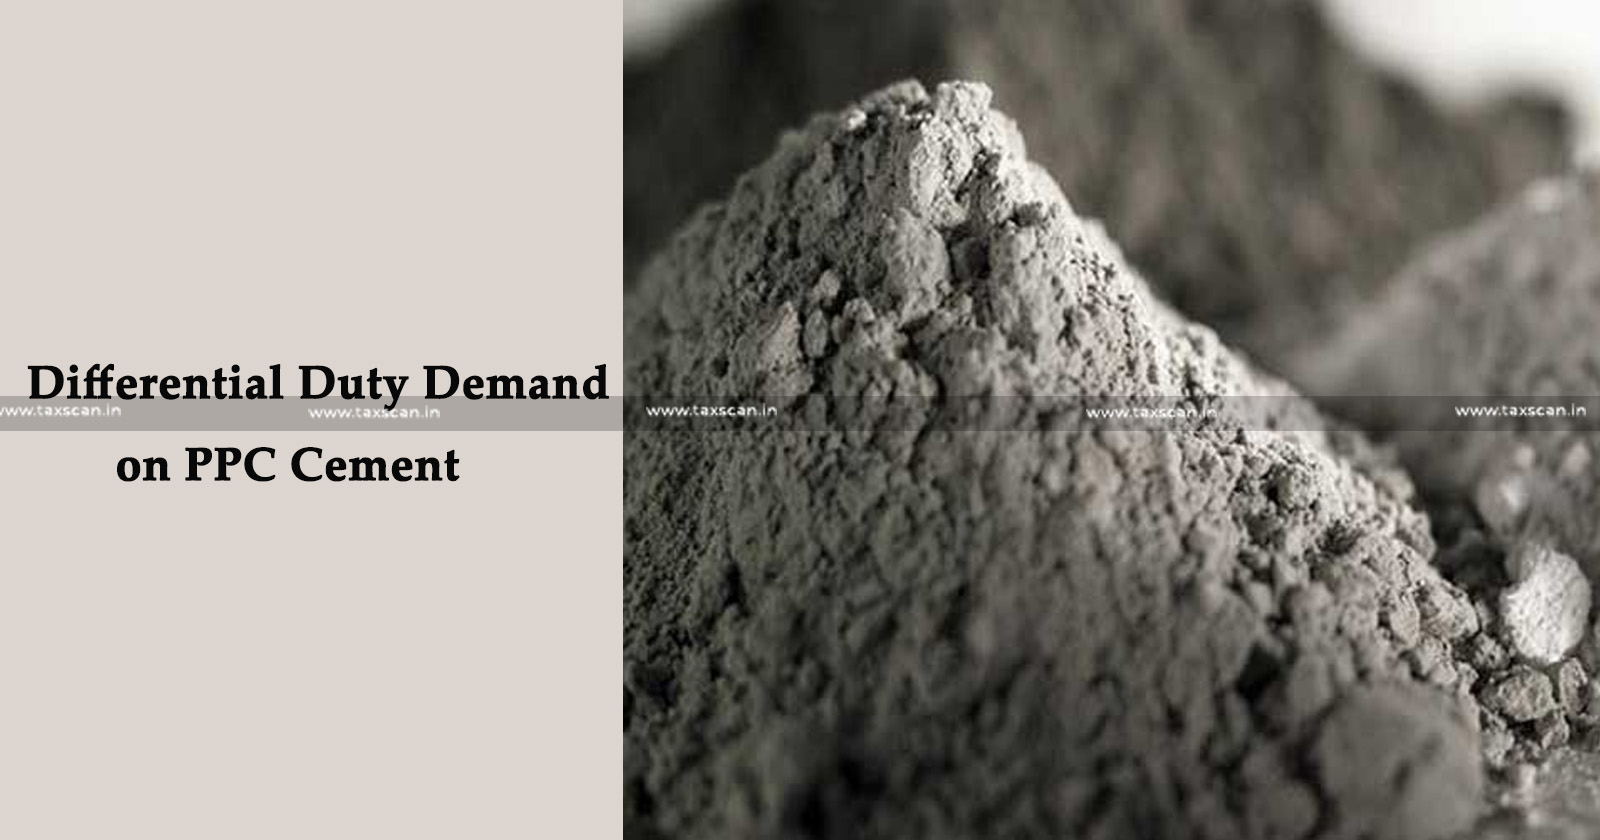 Demanding Differential Duty - Assessment of the Bills of Entry - CESTAT - Assessment - Bills of Entry - Differential Duty Demand on PPC Cement -PPC Cement - taxscan